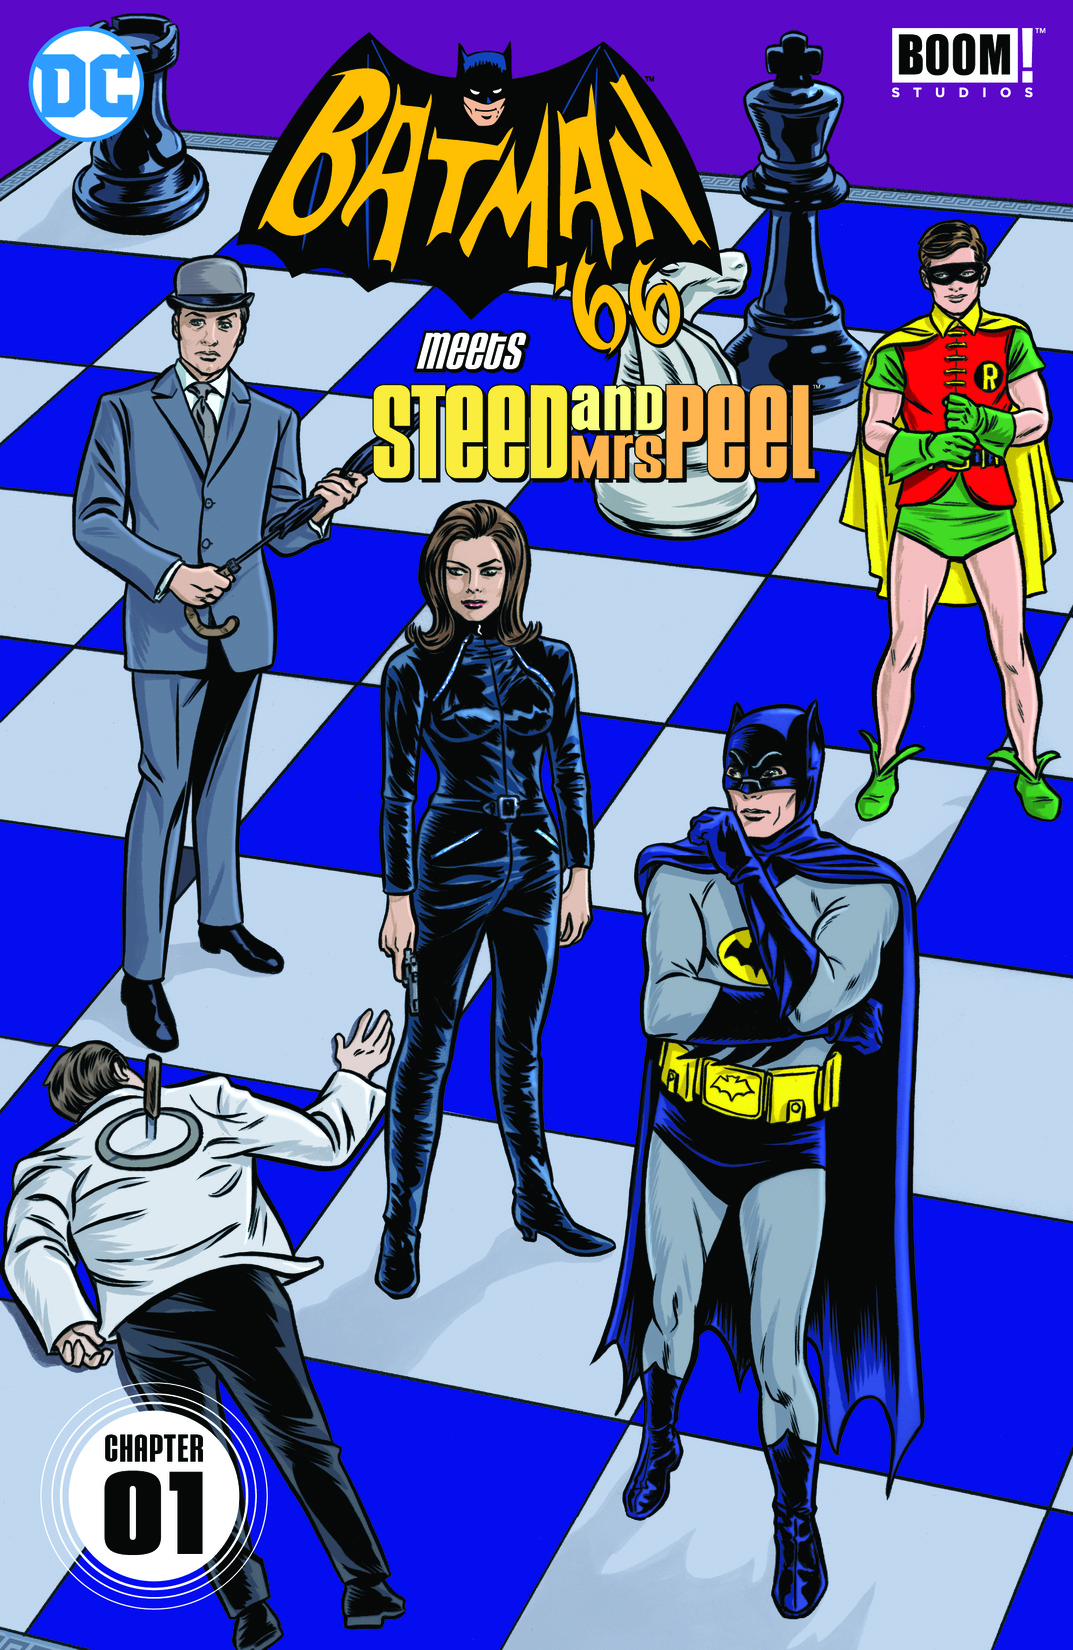 Batman '66 Meets Steed and Mrs Peel #1 preview images